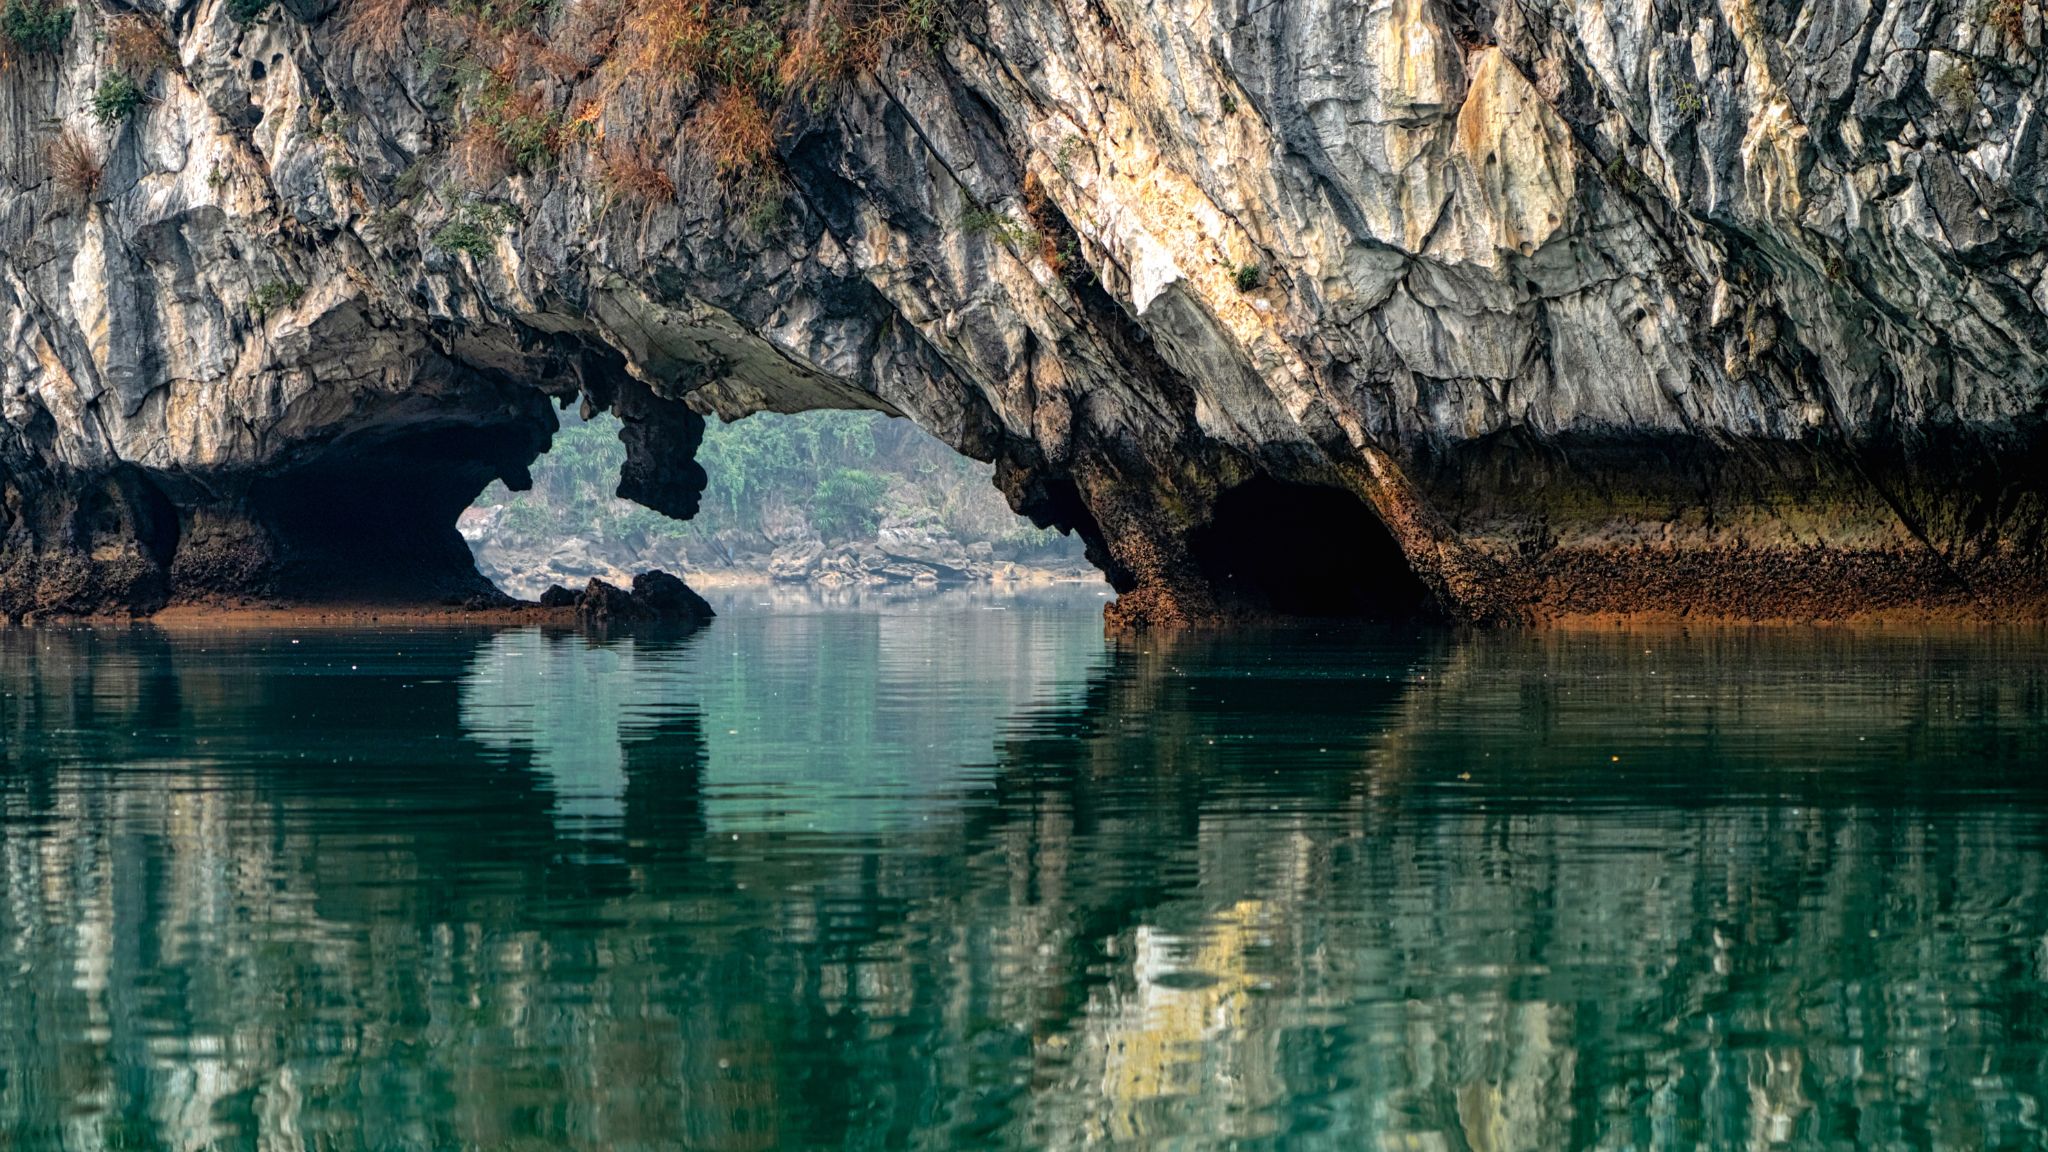 Day 8 Explore Outstanding Narural Caves In Halong